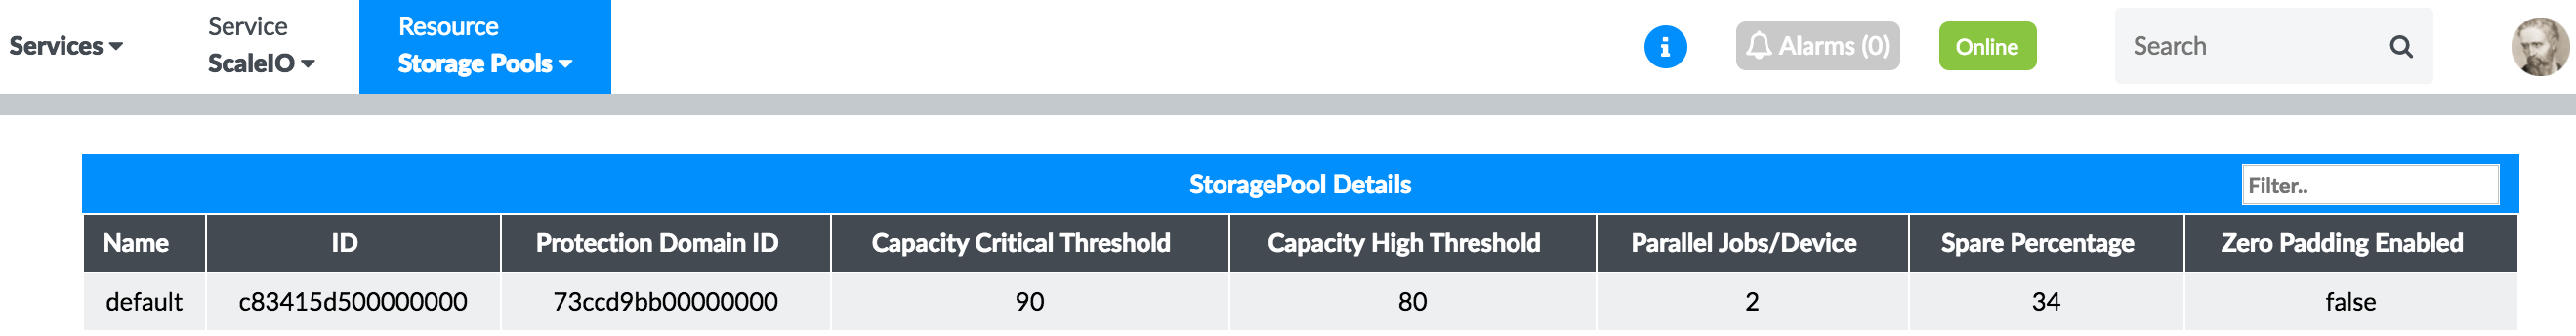 Real-Time Status of Storage Pools of the ScaleIO Cluster